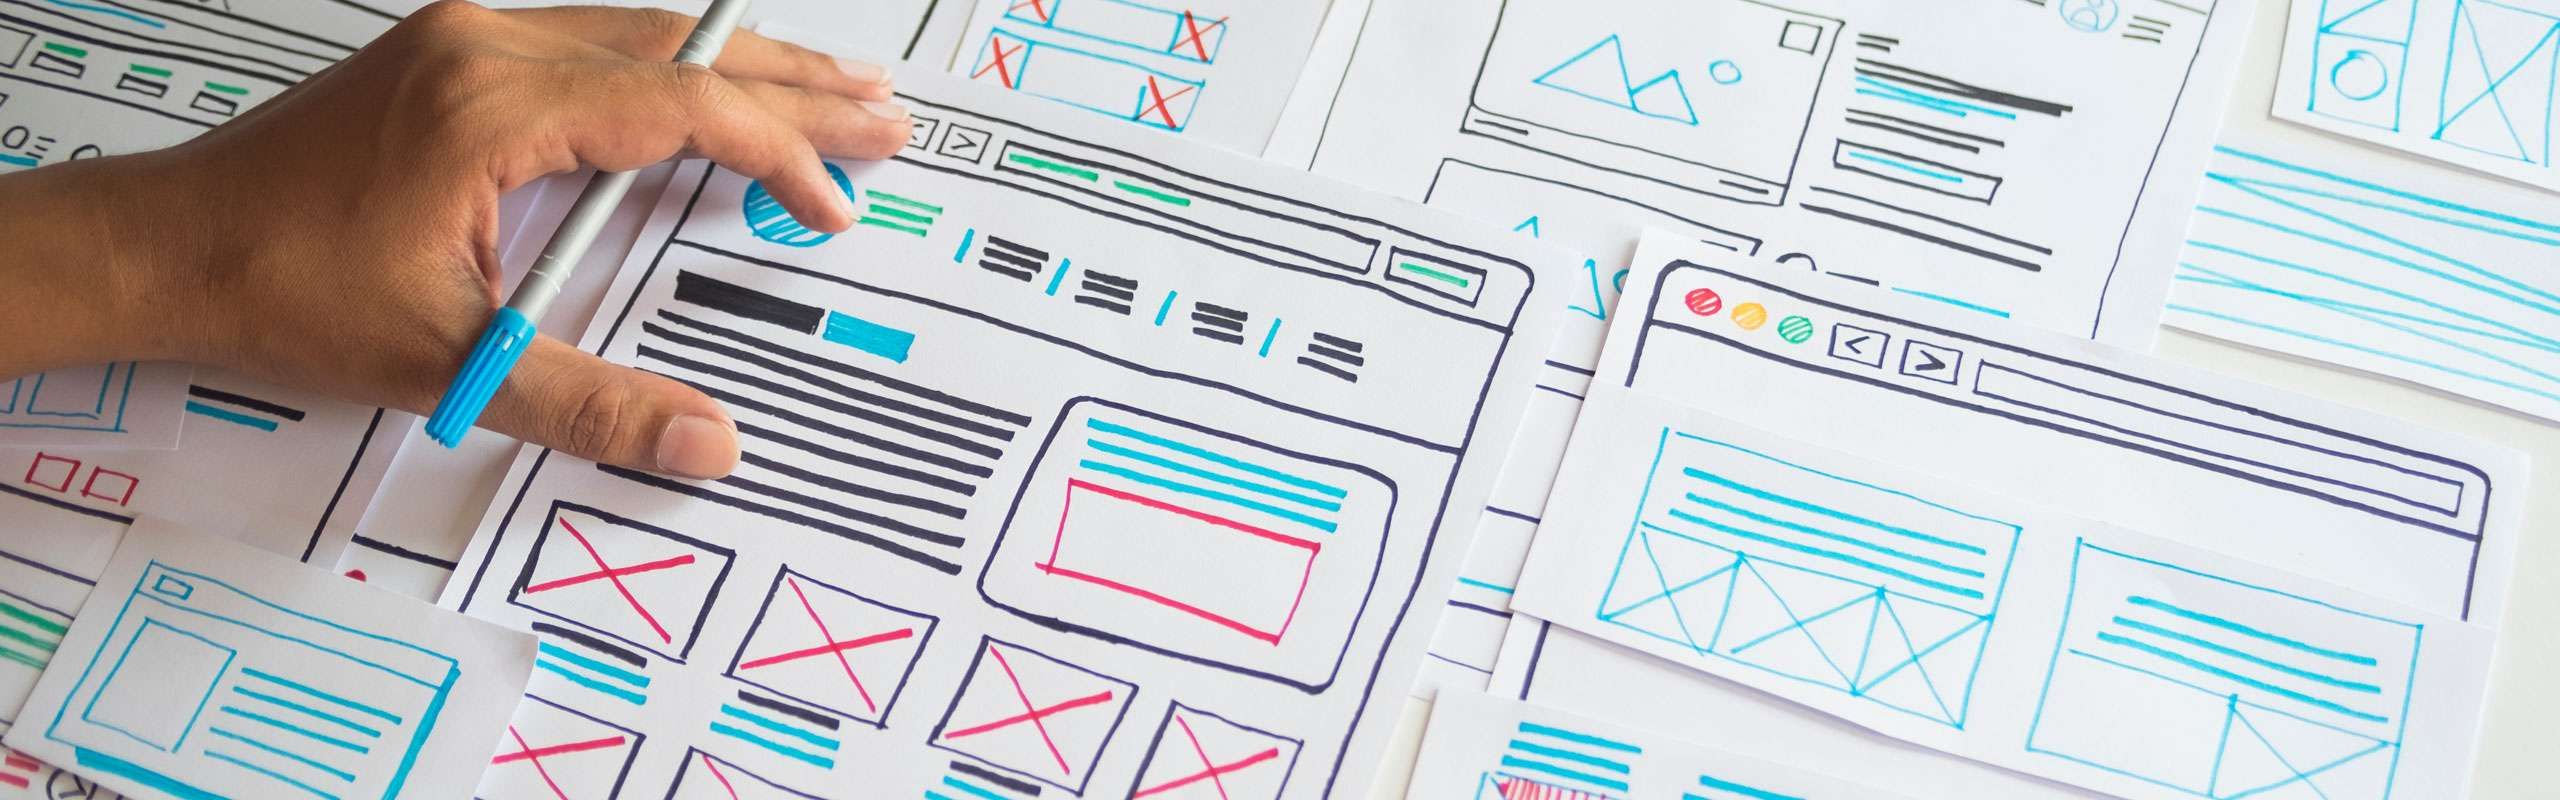 How to Tell if Your Website Needs a Redesign How to Tell if Your Website Needs a Redesign How to Tell if Your Website Needs a Redesign